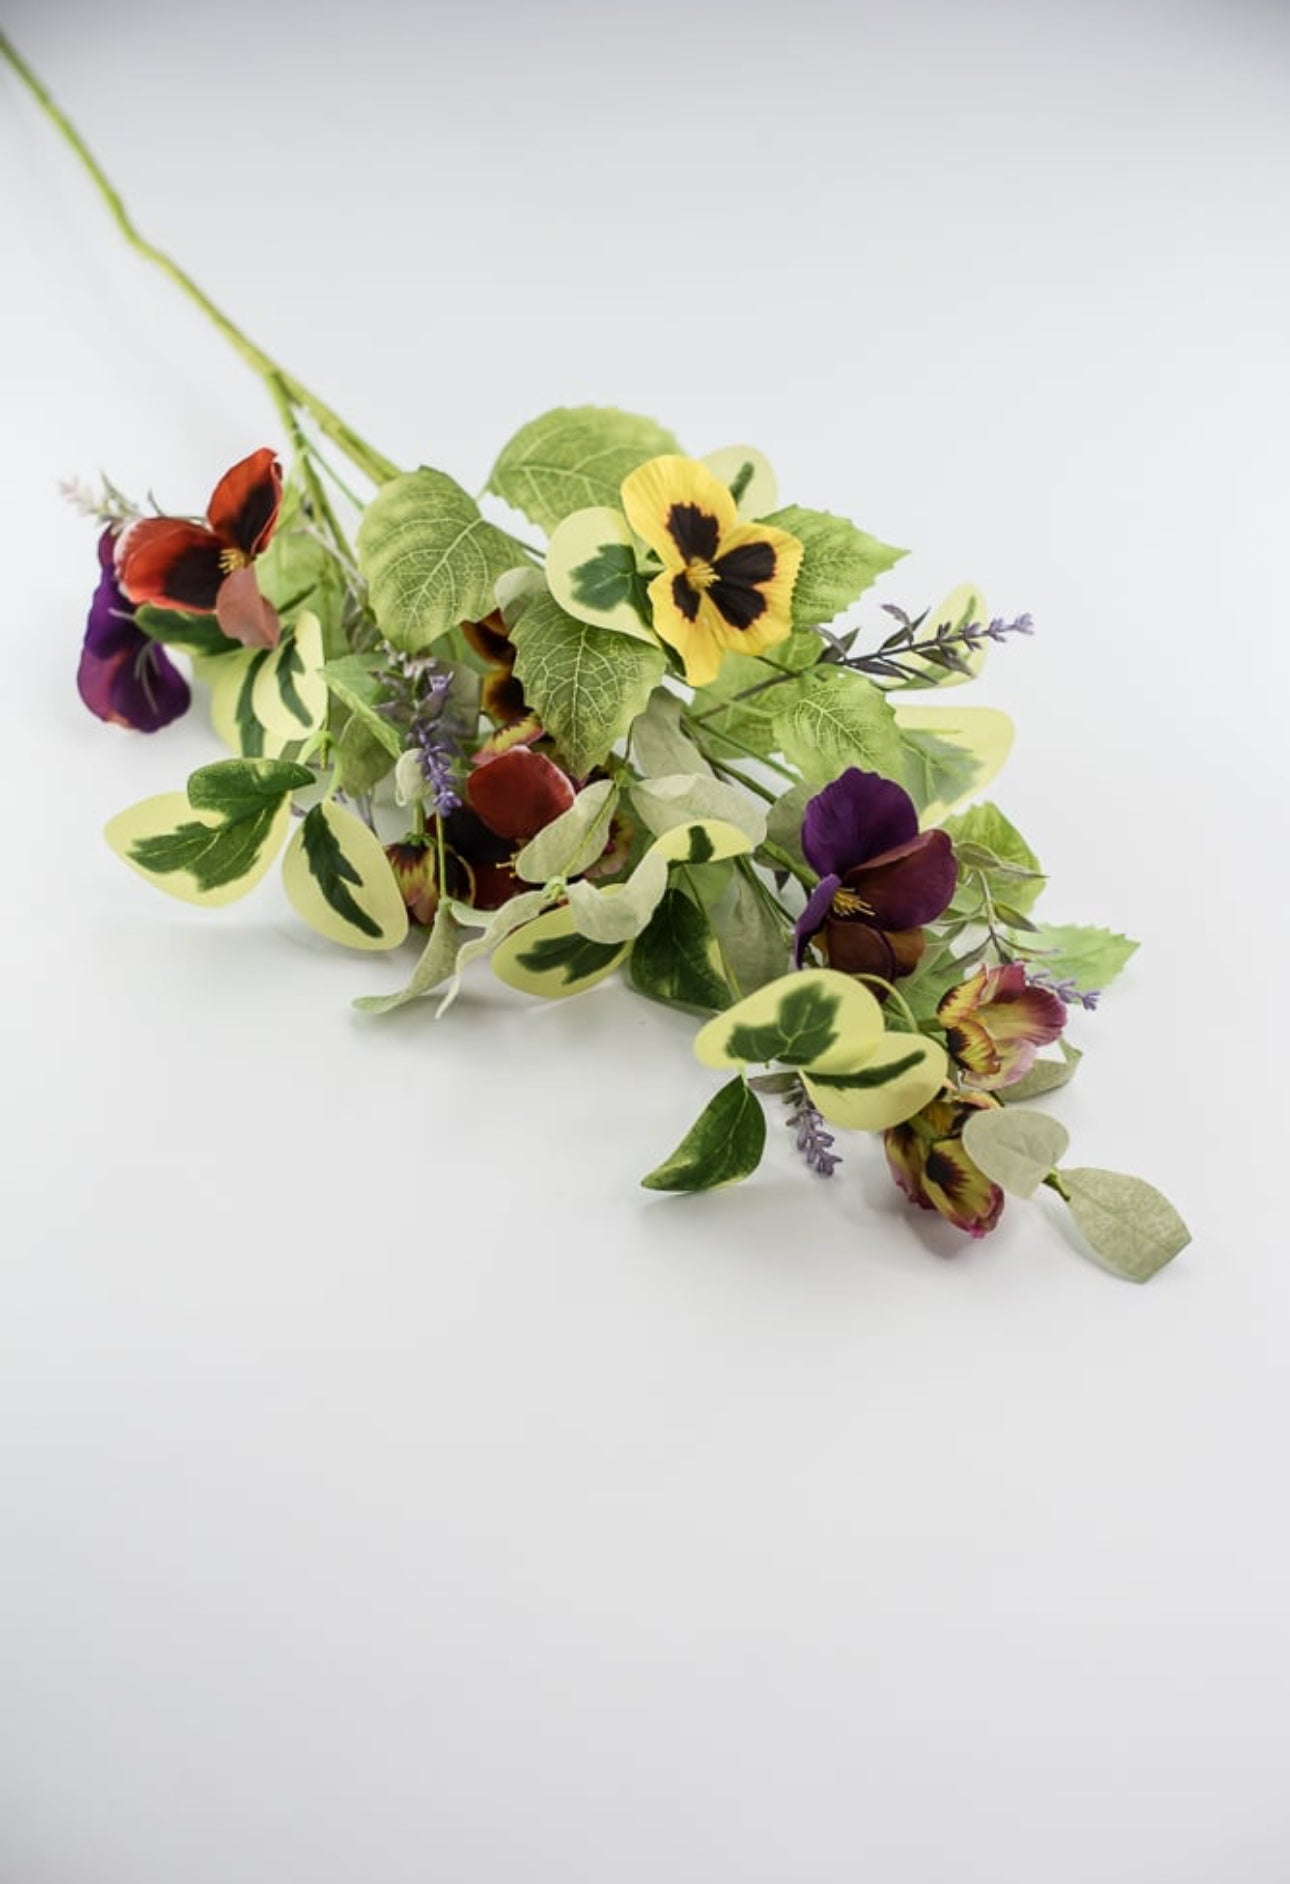 Pansy and greenery spray - Greenery Marketartificial flowers63967